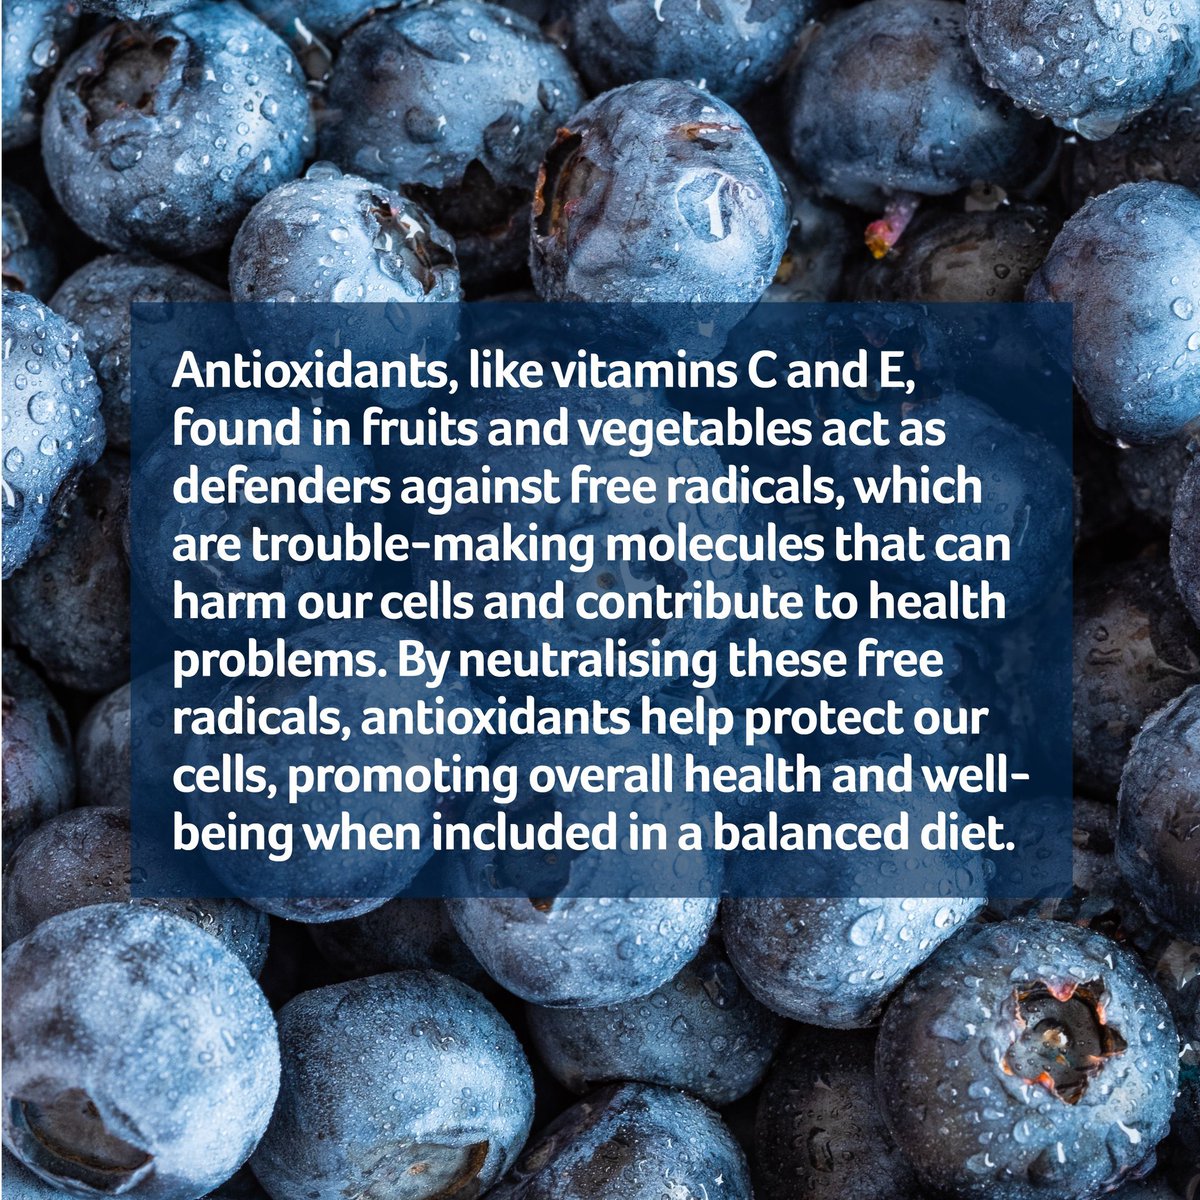 Continuing our #EatTheRainbow blue and purple themed month, here is a juicy fact about blueberries that might surprise you. See if you can include these vibrant berries in your meals!🫐 #AccentCatering #Antioxidants #HealthyEating #EatTheRainbow #NutritionFacts #Superfoods